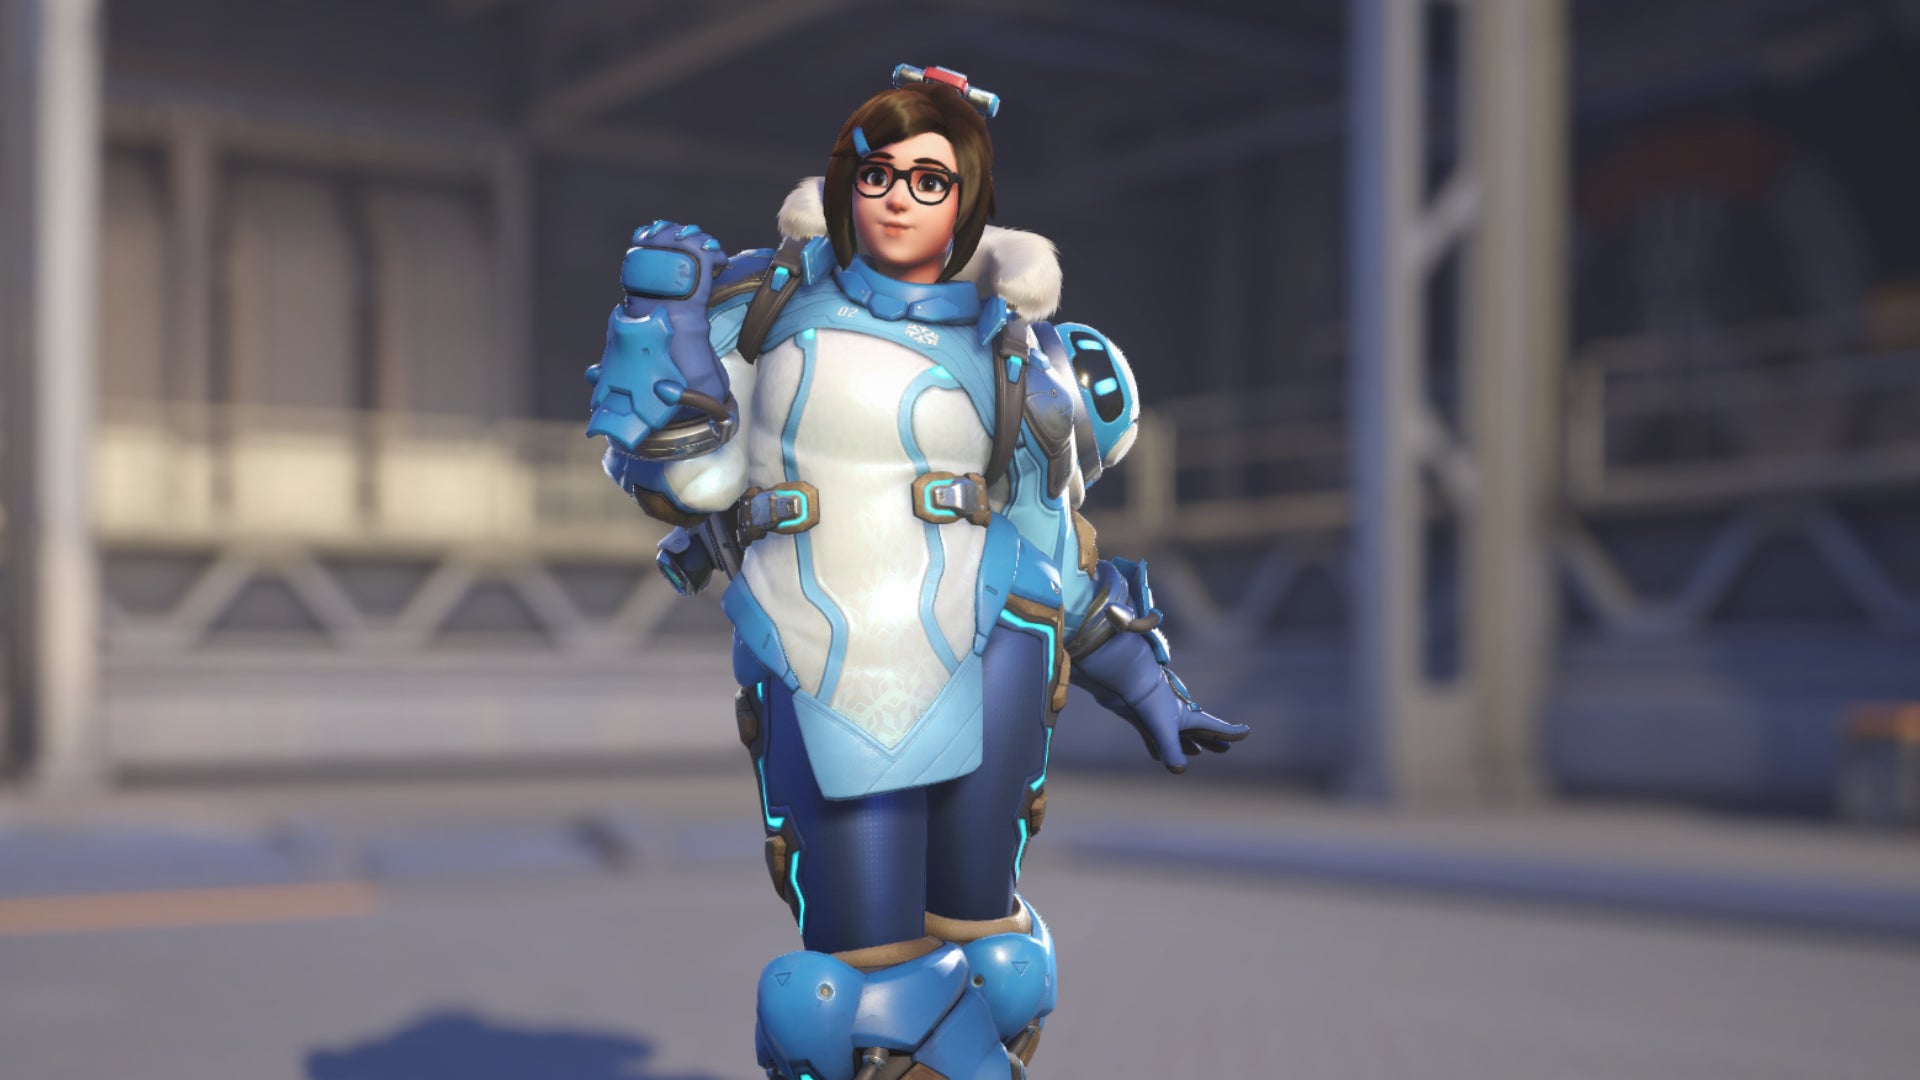 Mei, a hero in Overwatch 2, poses before the camera in the hero selection screen.